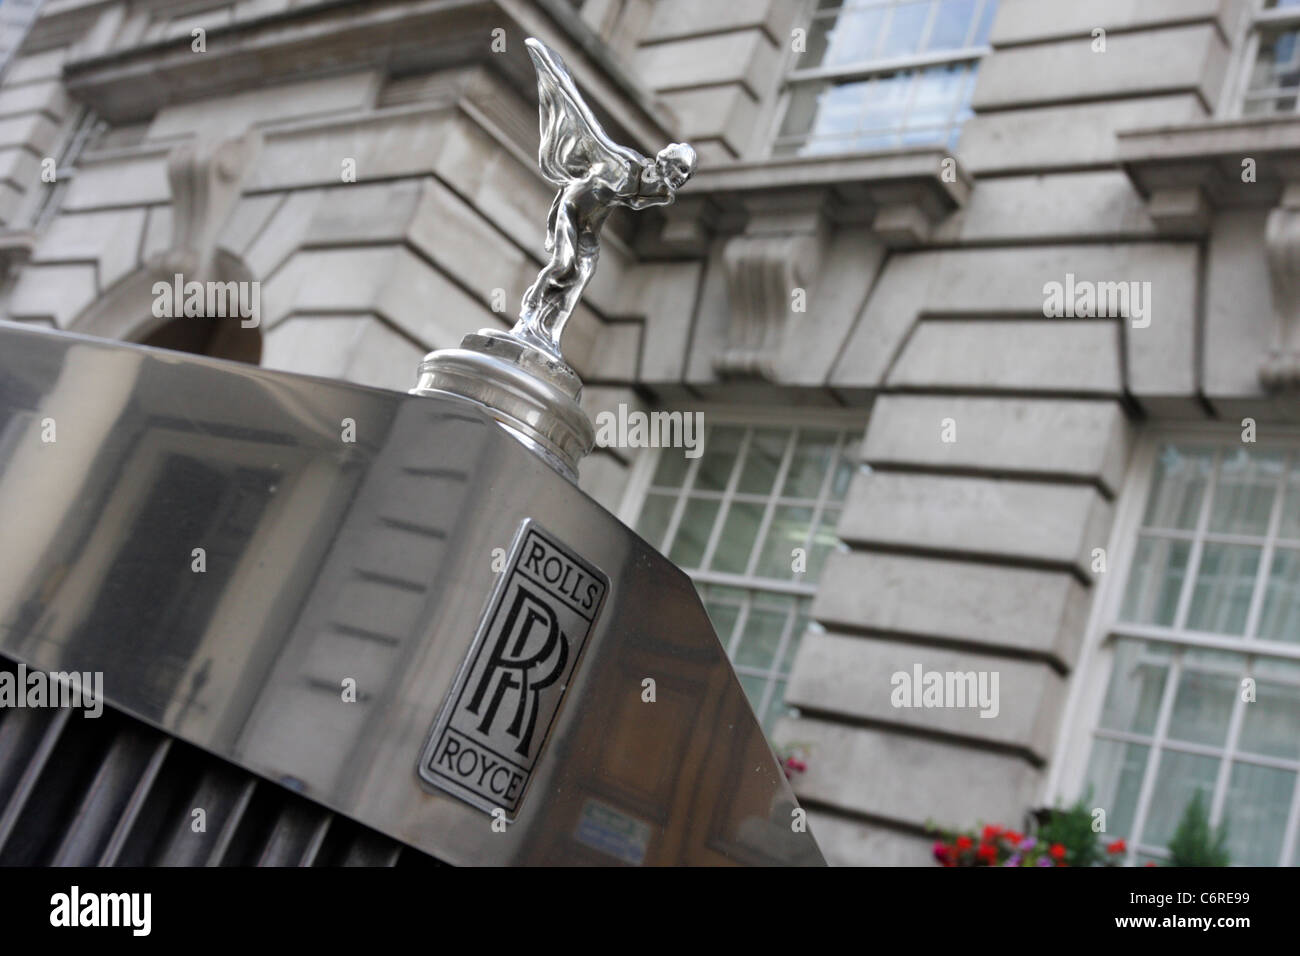 Delightful Rolls Royce Silver Cloud 11 convertible, viewed here in Pall Mall, London. Stock Photo